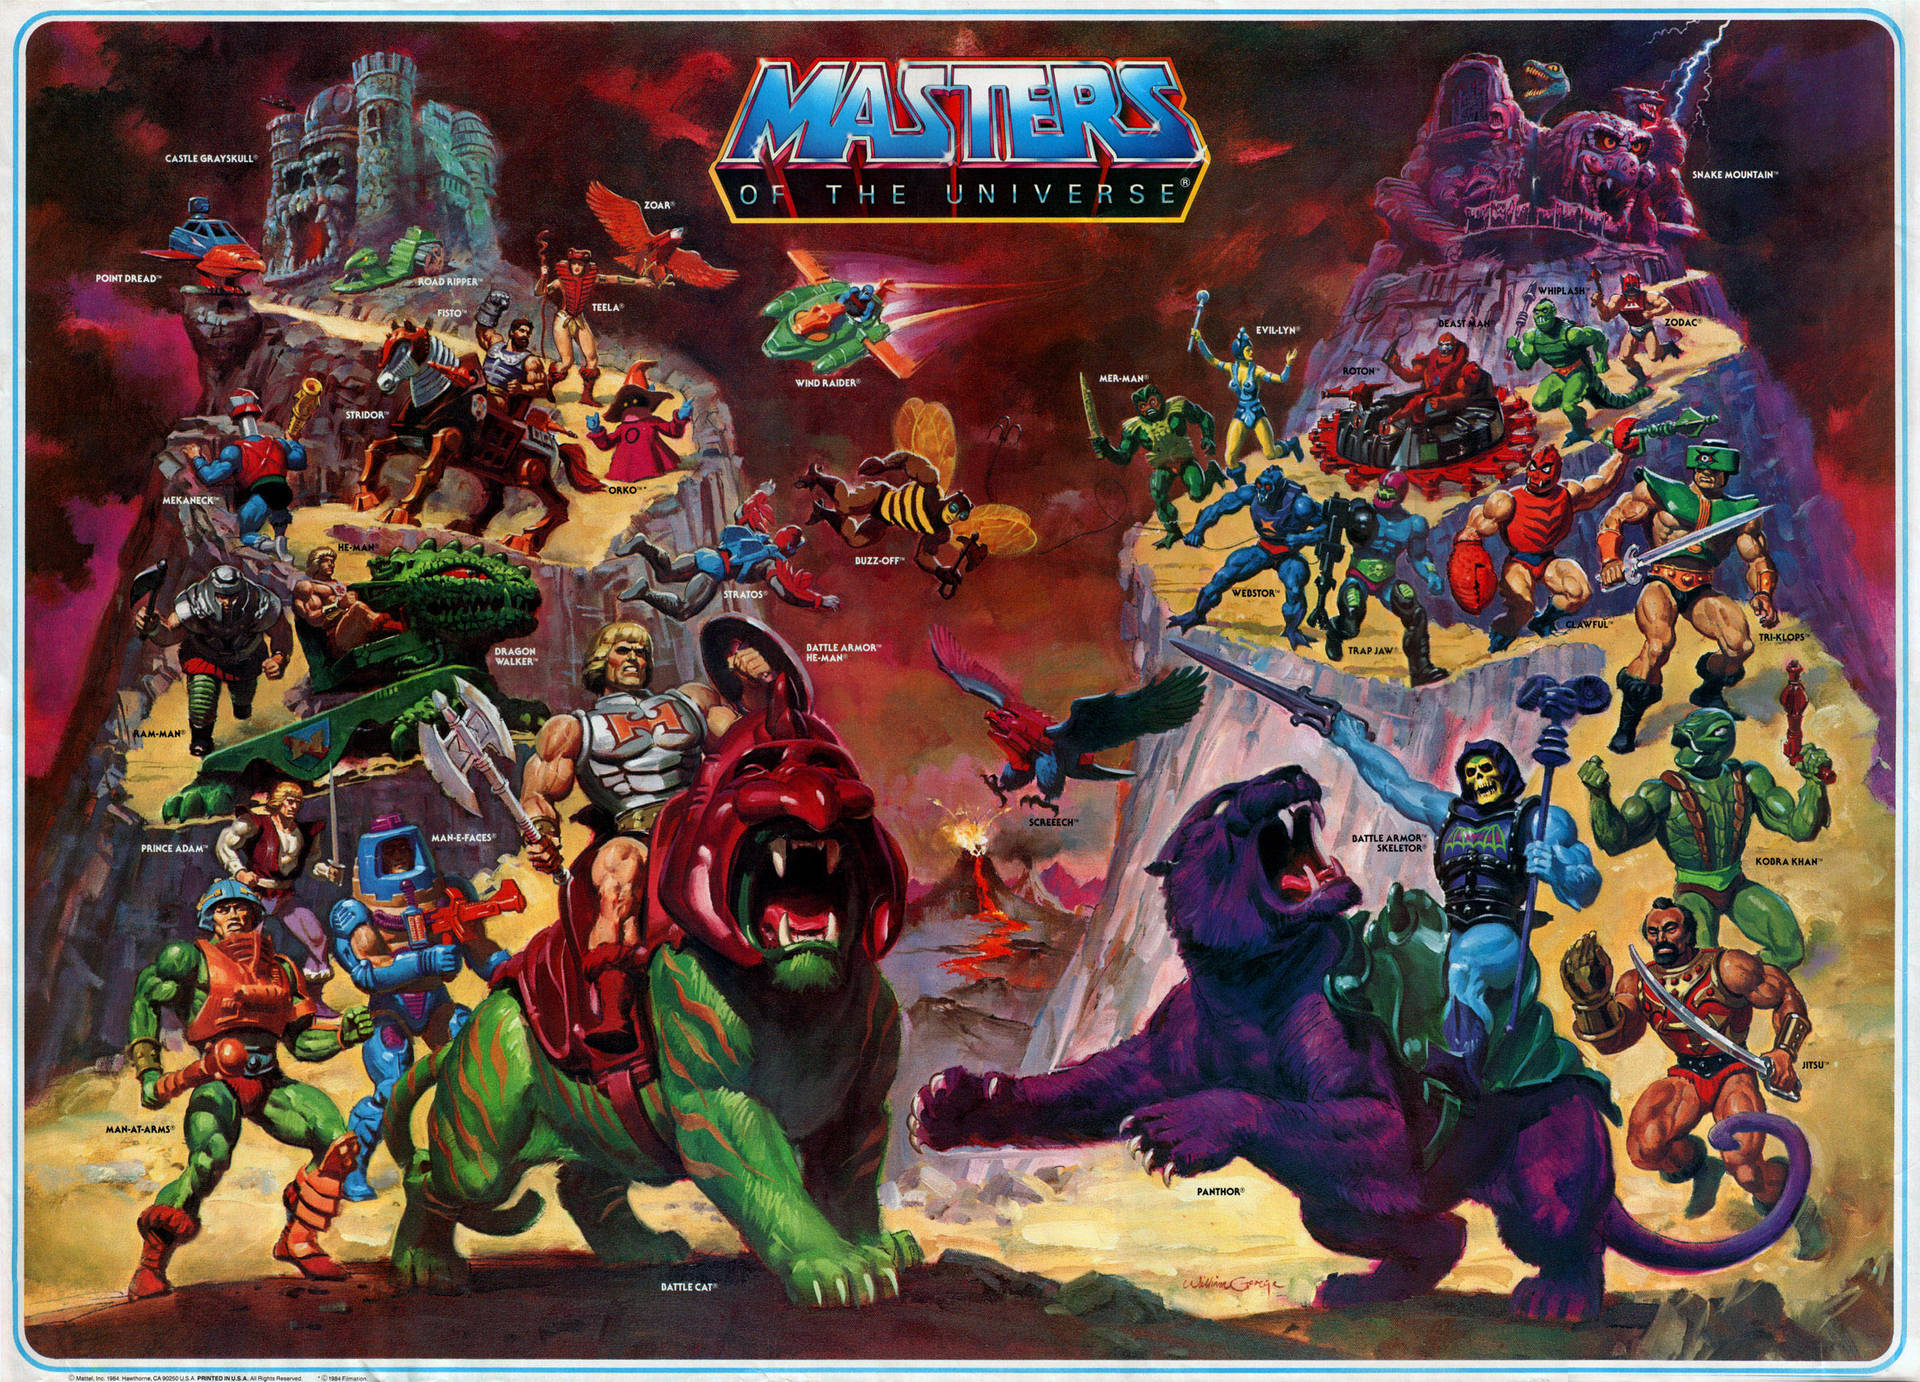 He-man And The Masters Of The Universe Series Poster Wallpaper